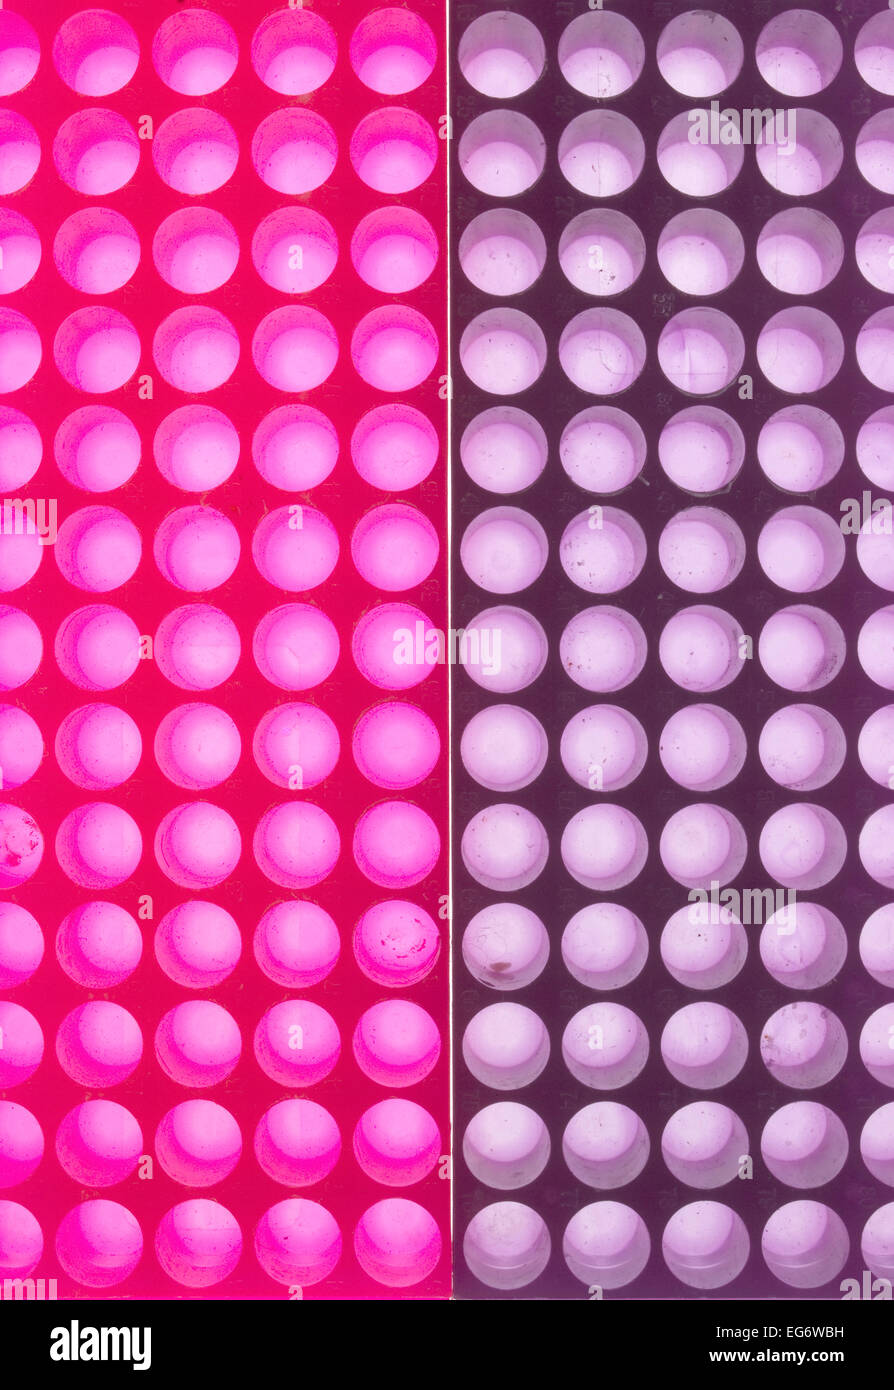 Cell culture plate Stock Photo